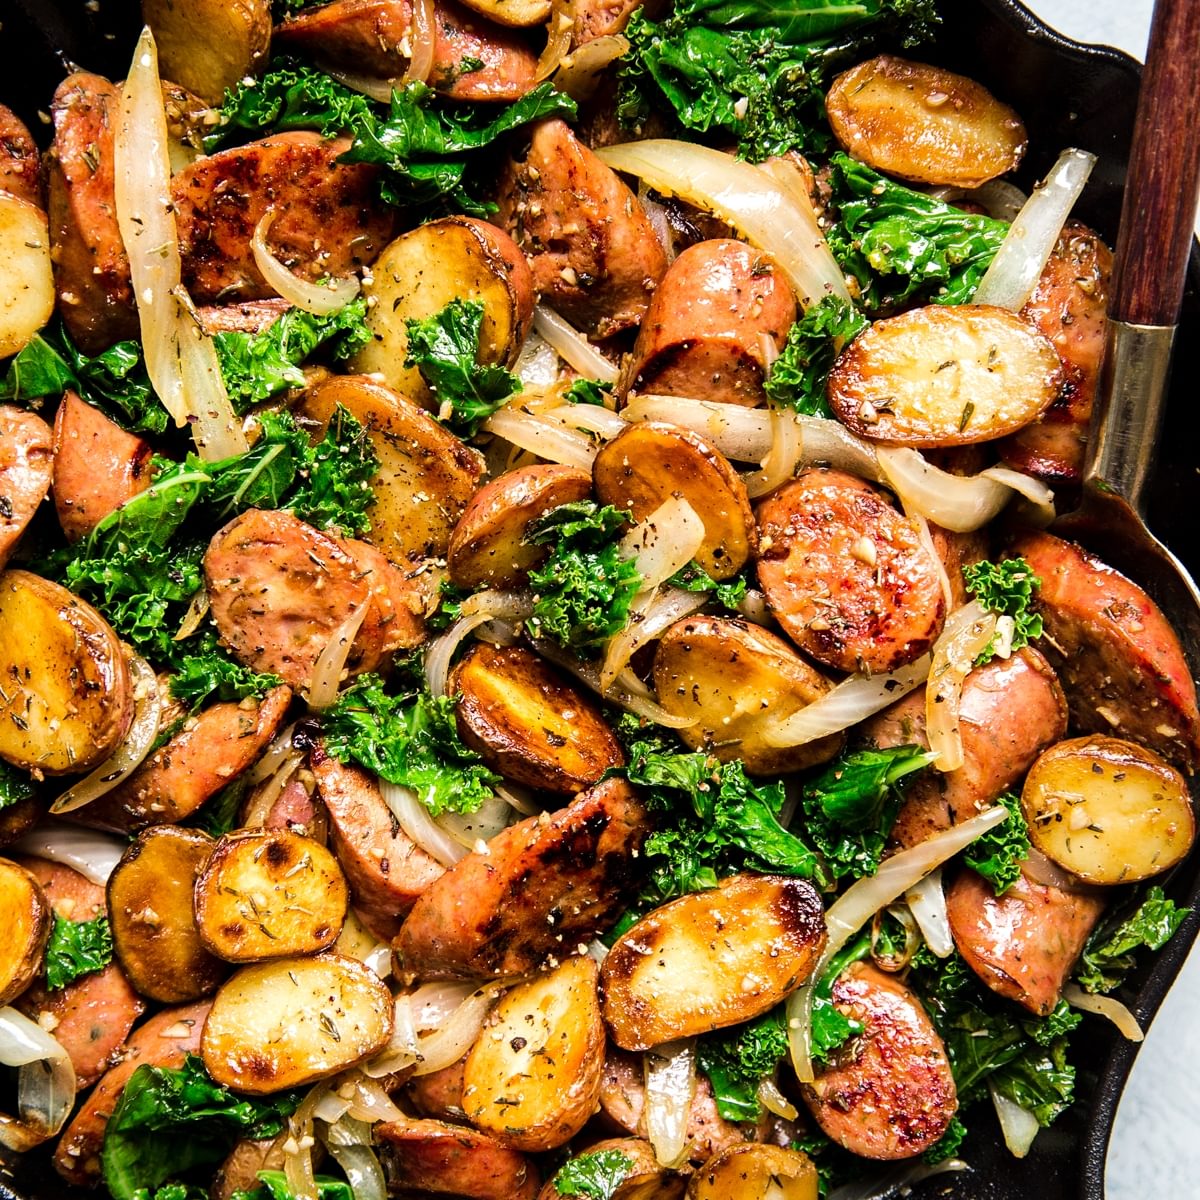 Sausage Kale And Potato Skillet Dinner The Modern Proper,How To Grill Pork Chops On Charcoal Grill